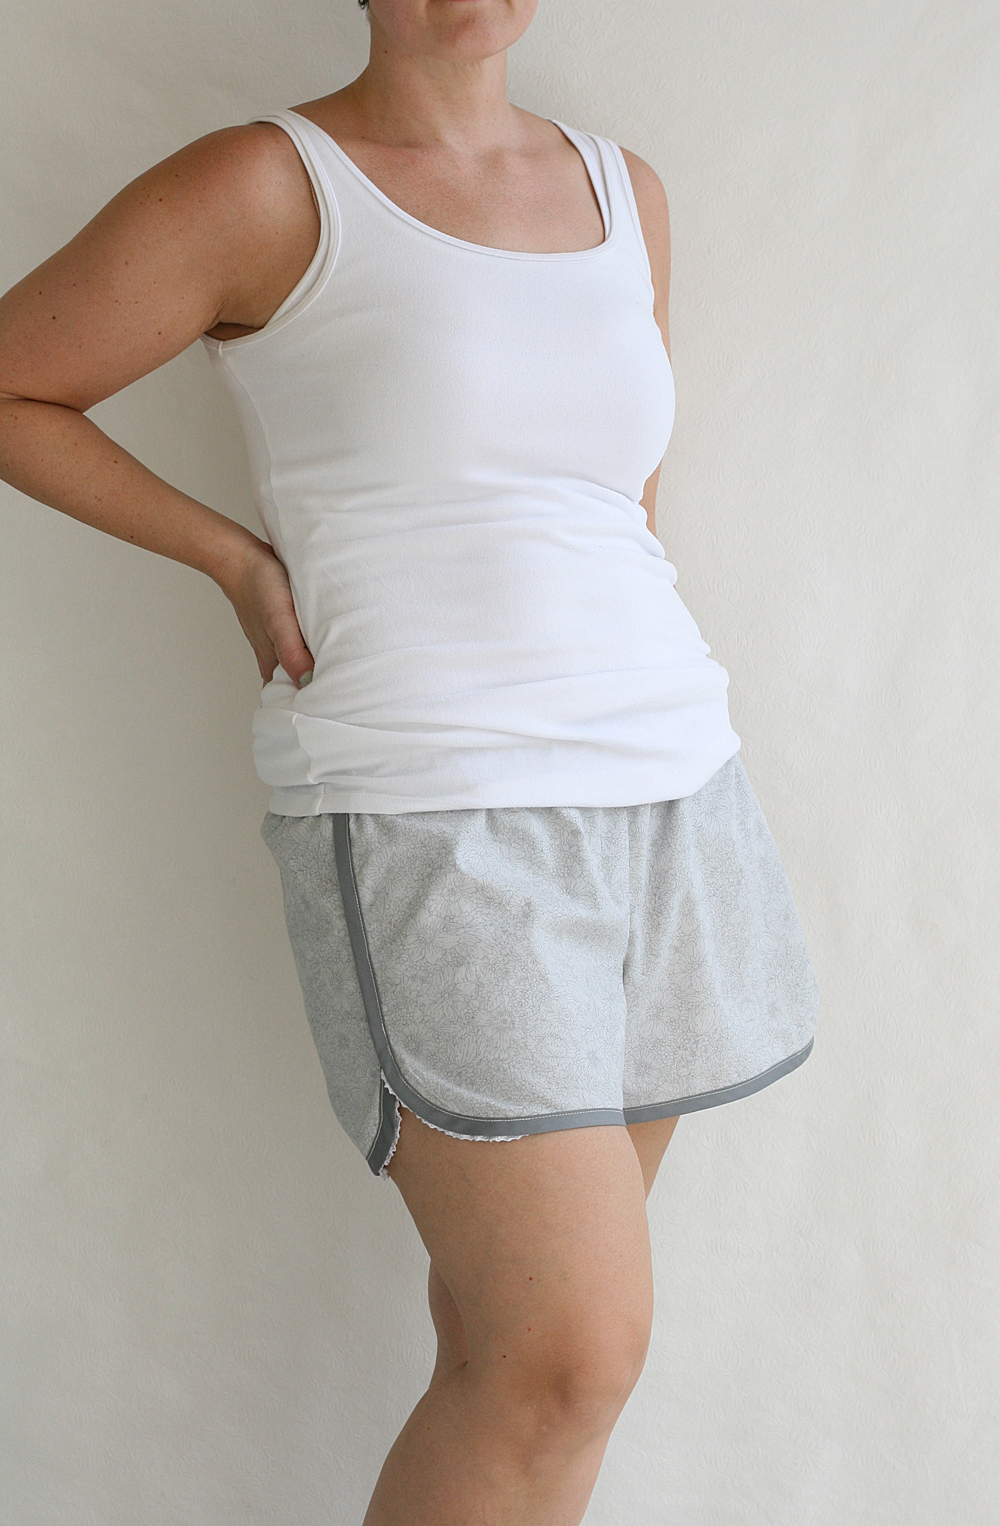 purl soho city gym shorts pattern review